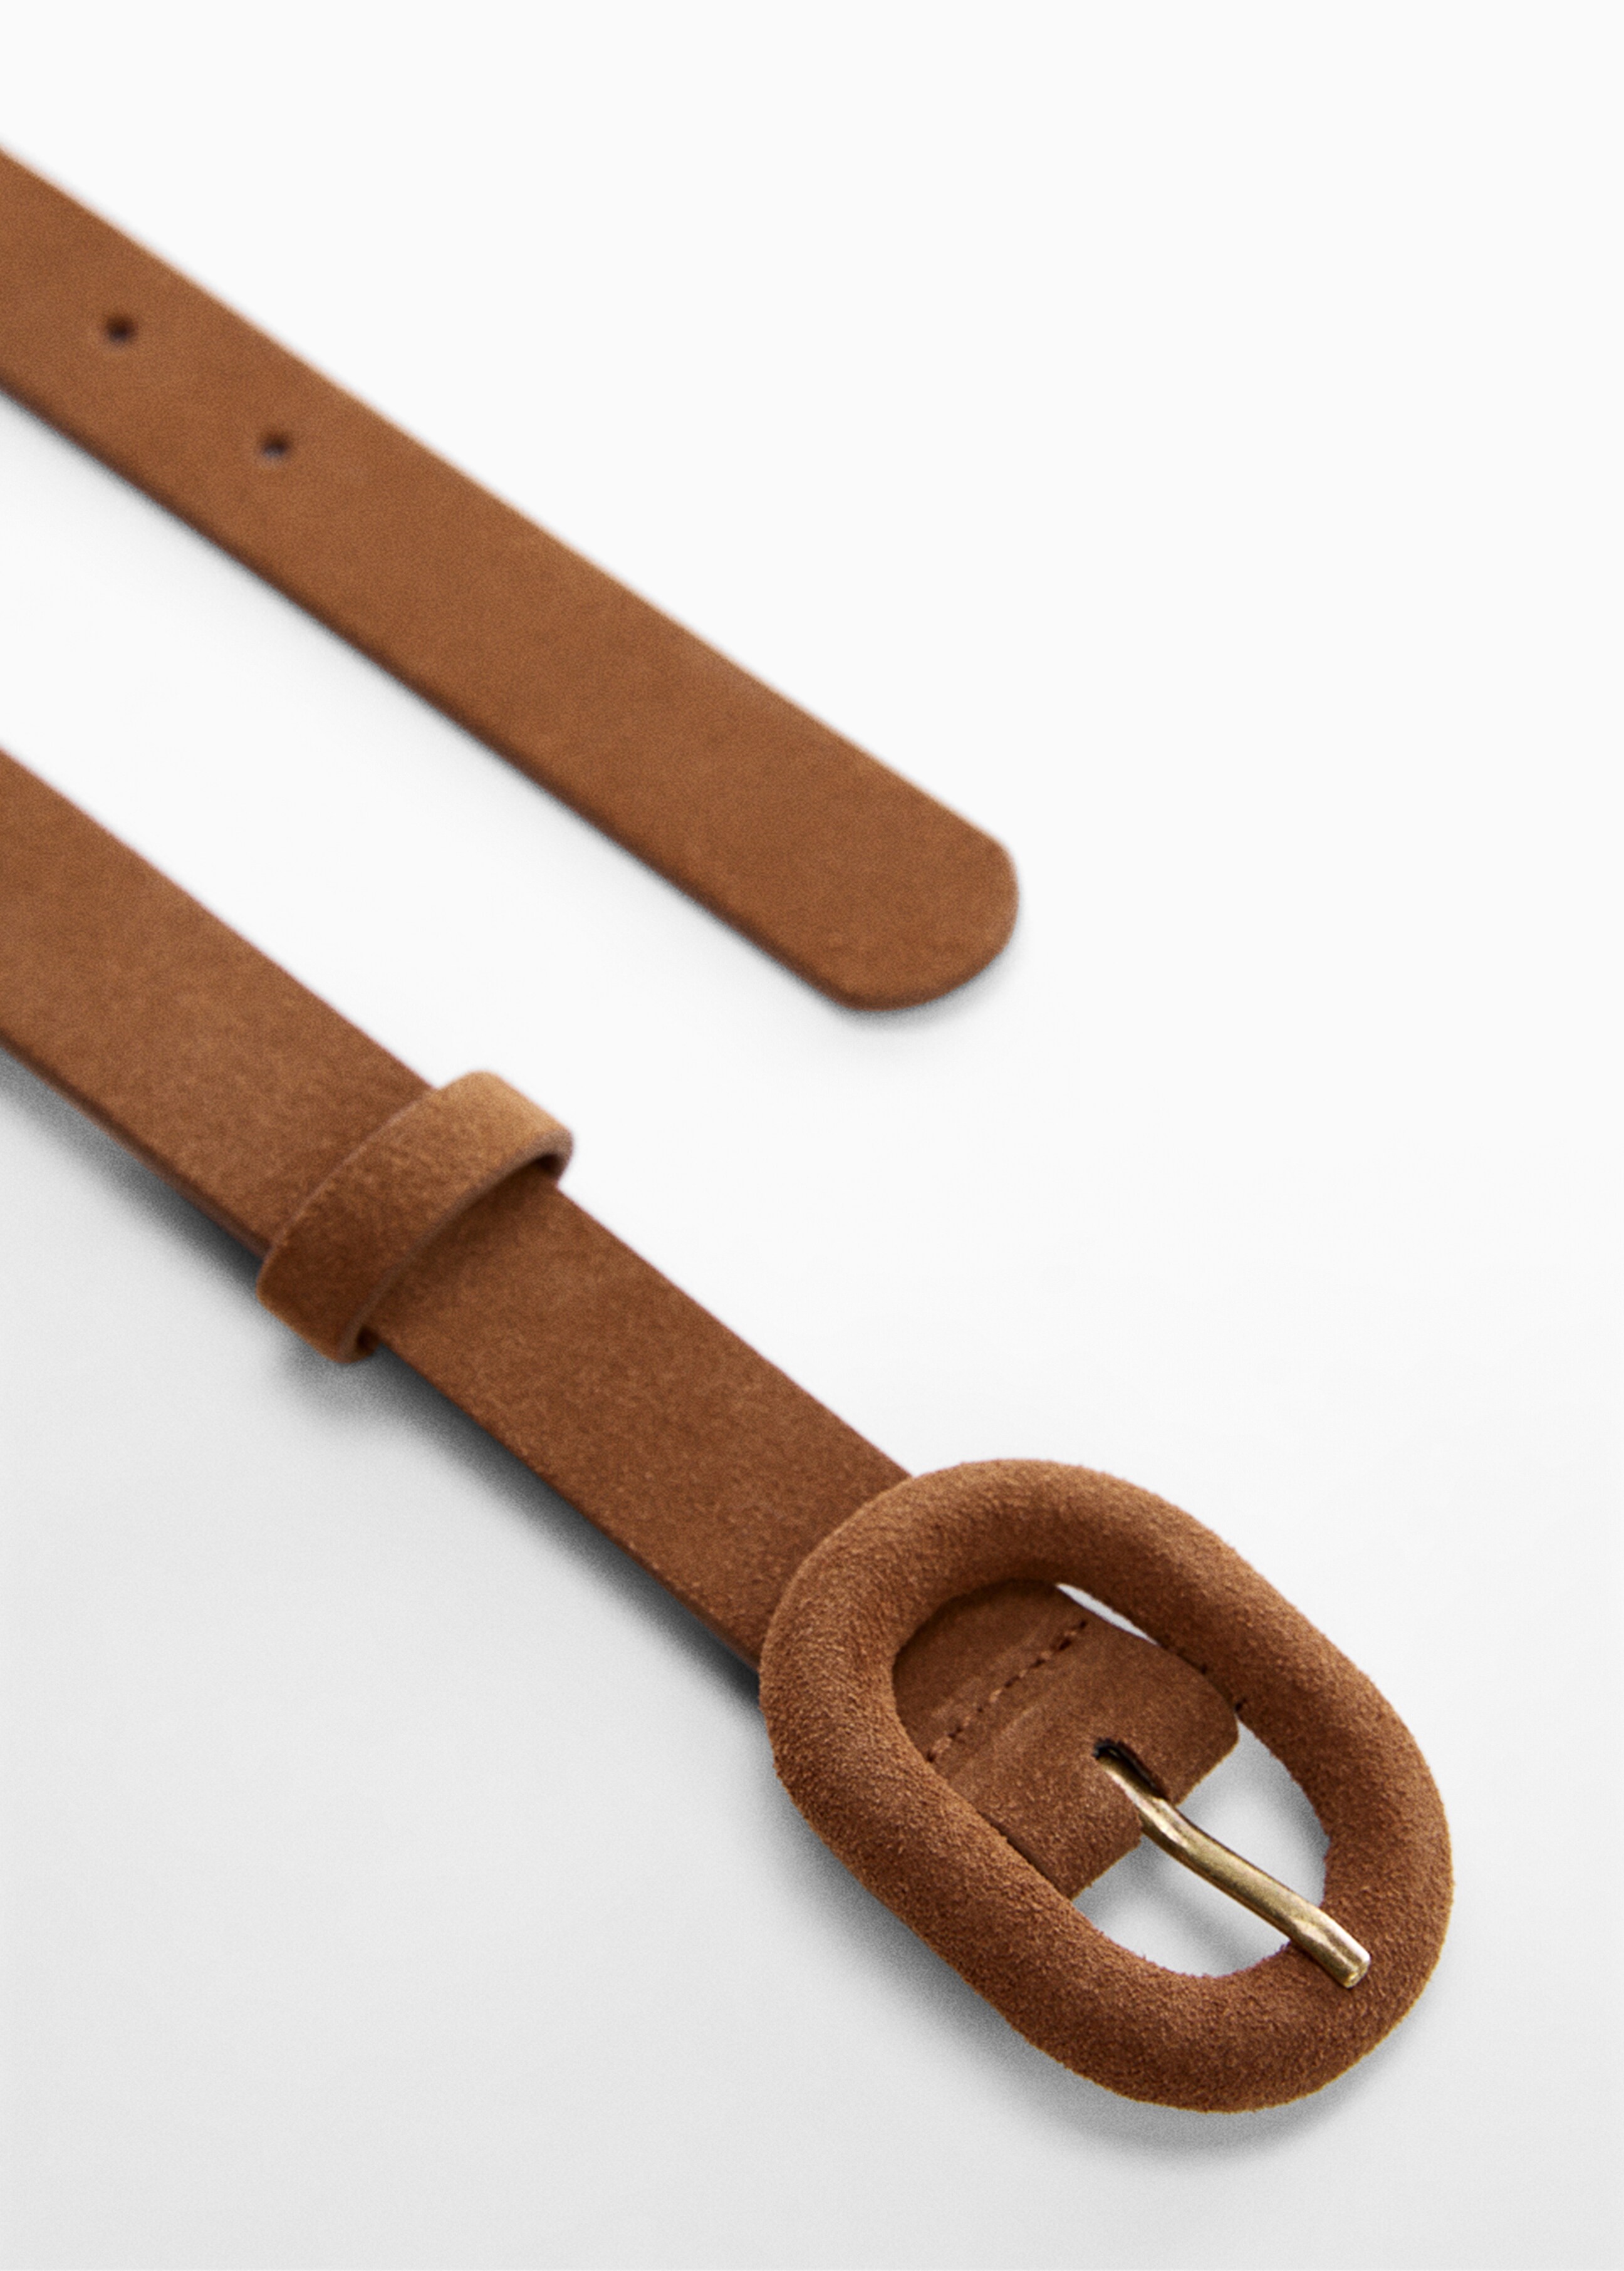 Leather belt with wide buckle - Medium plane